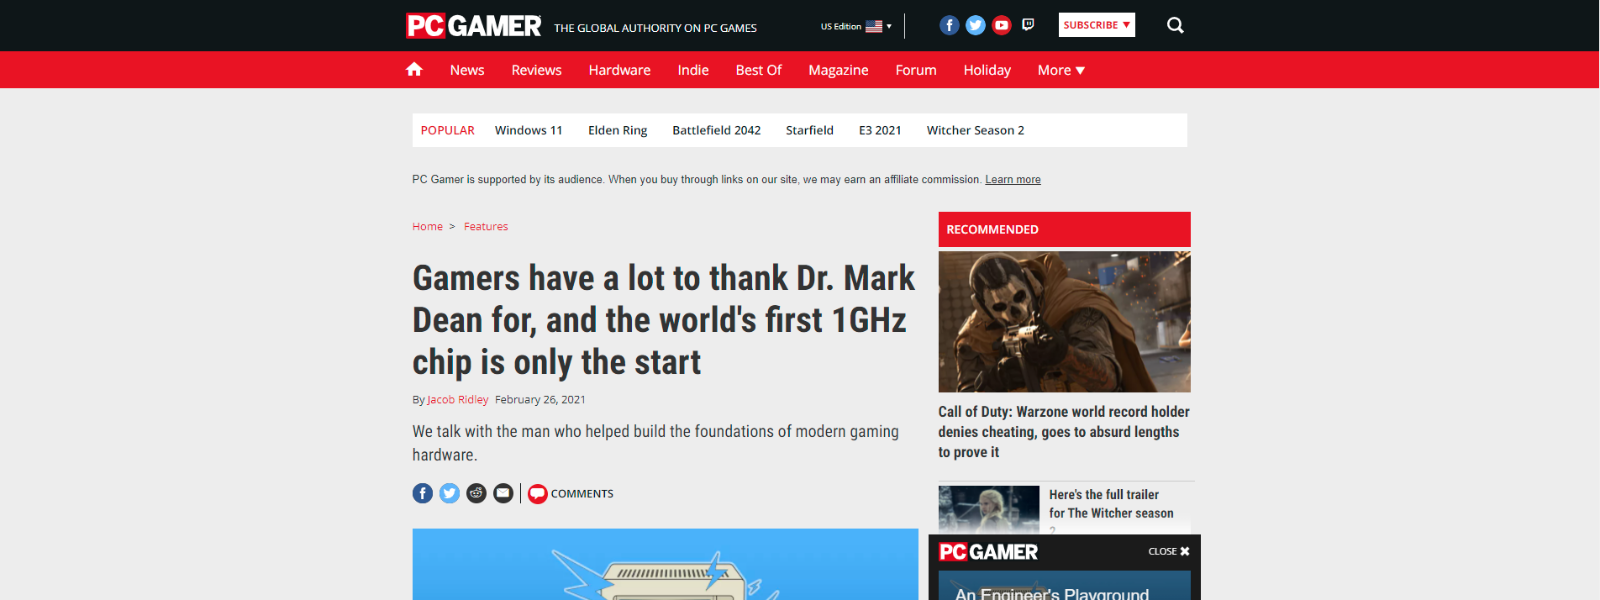 Dr. Dean featured in PC Gamer